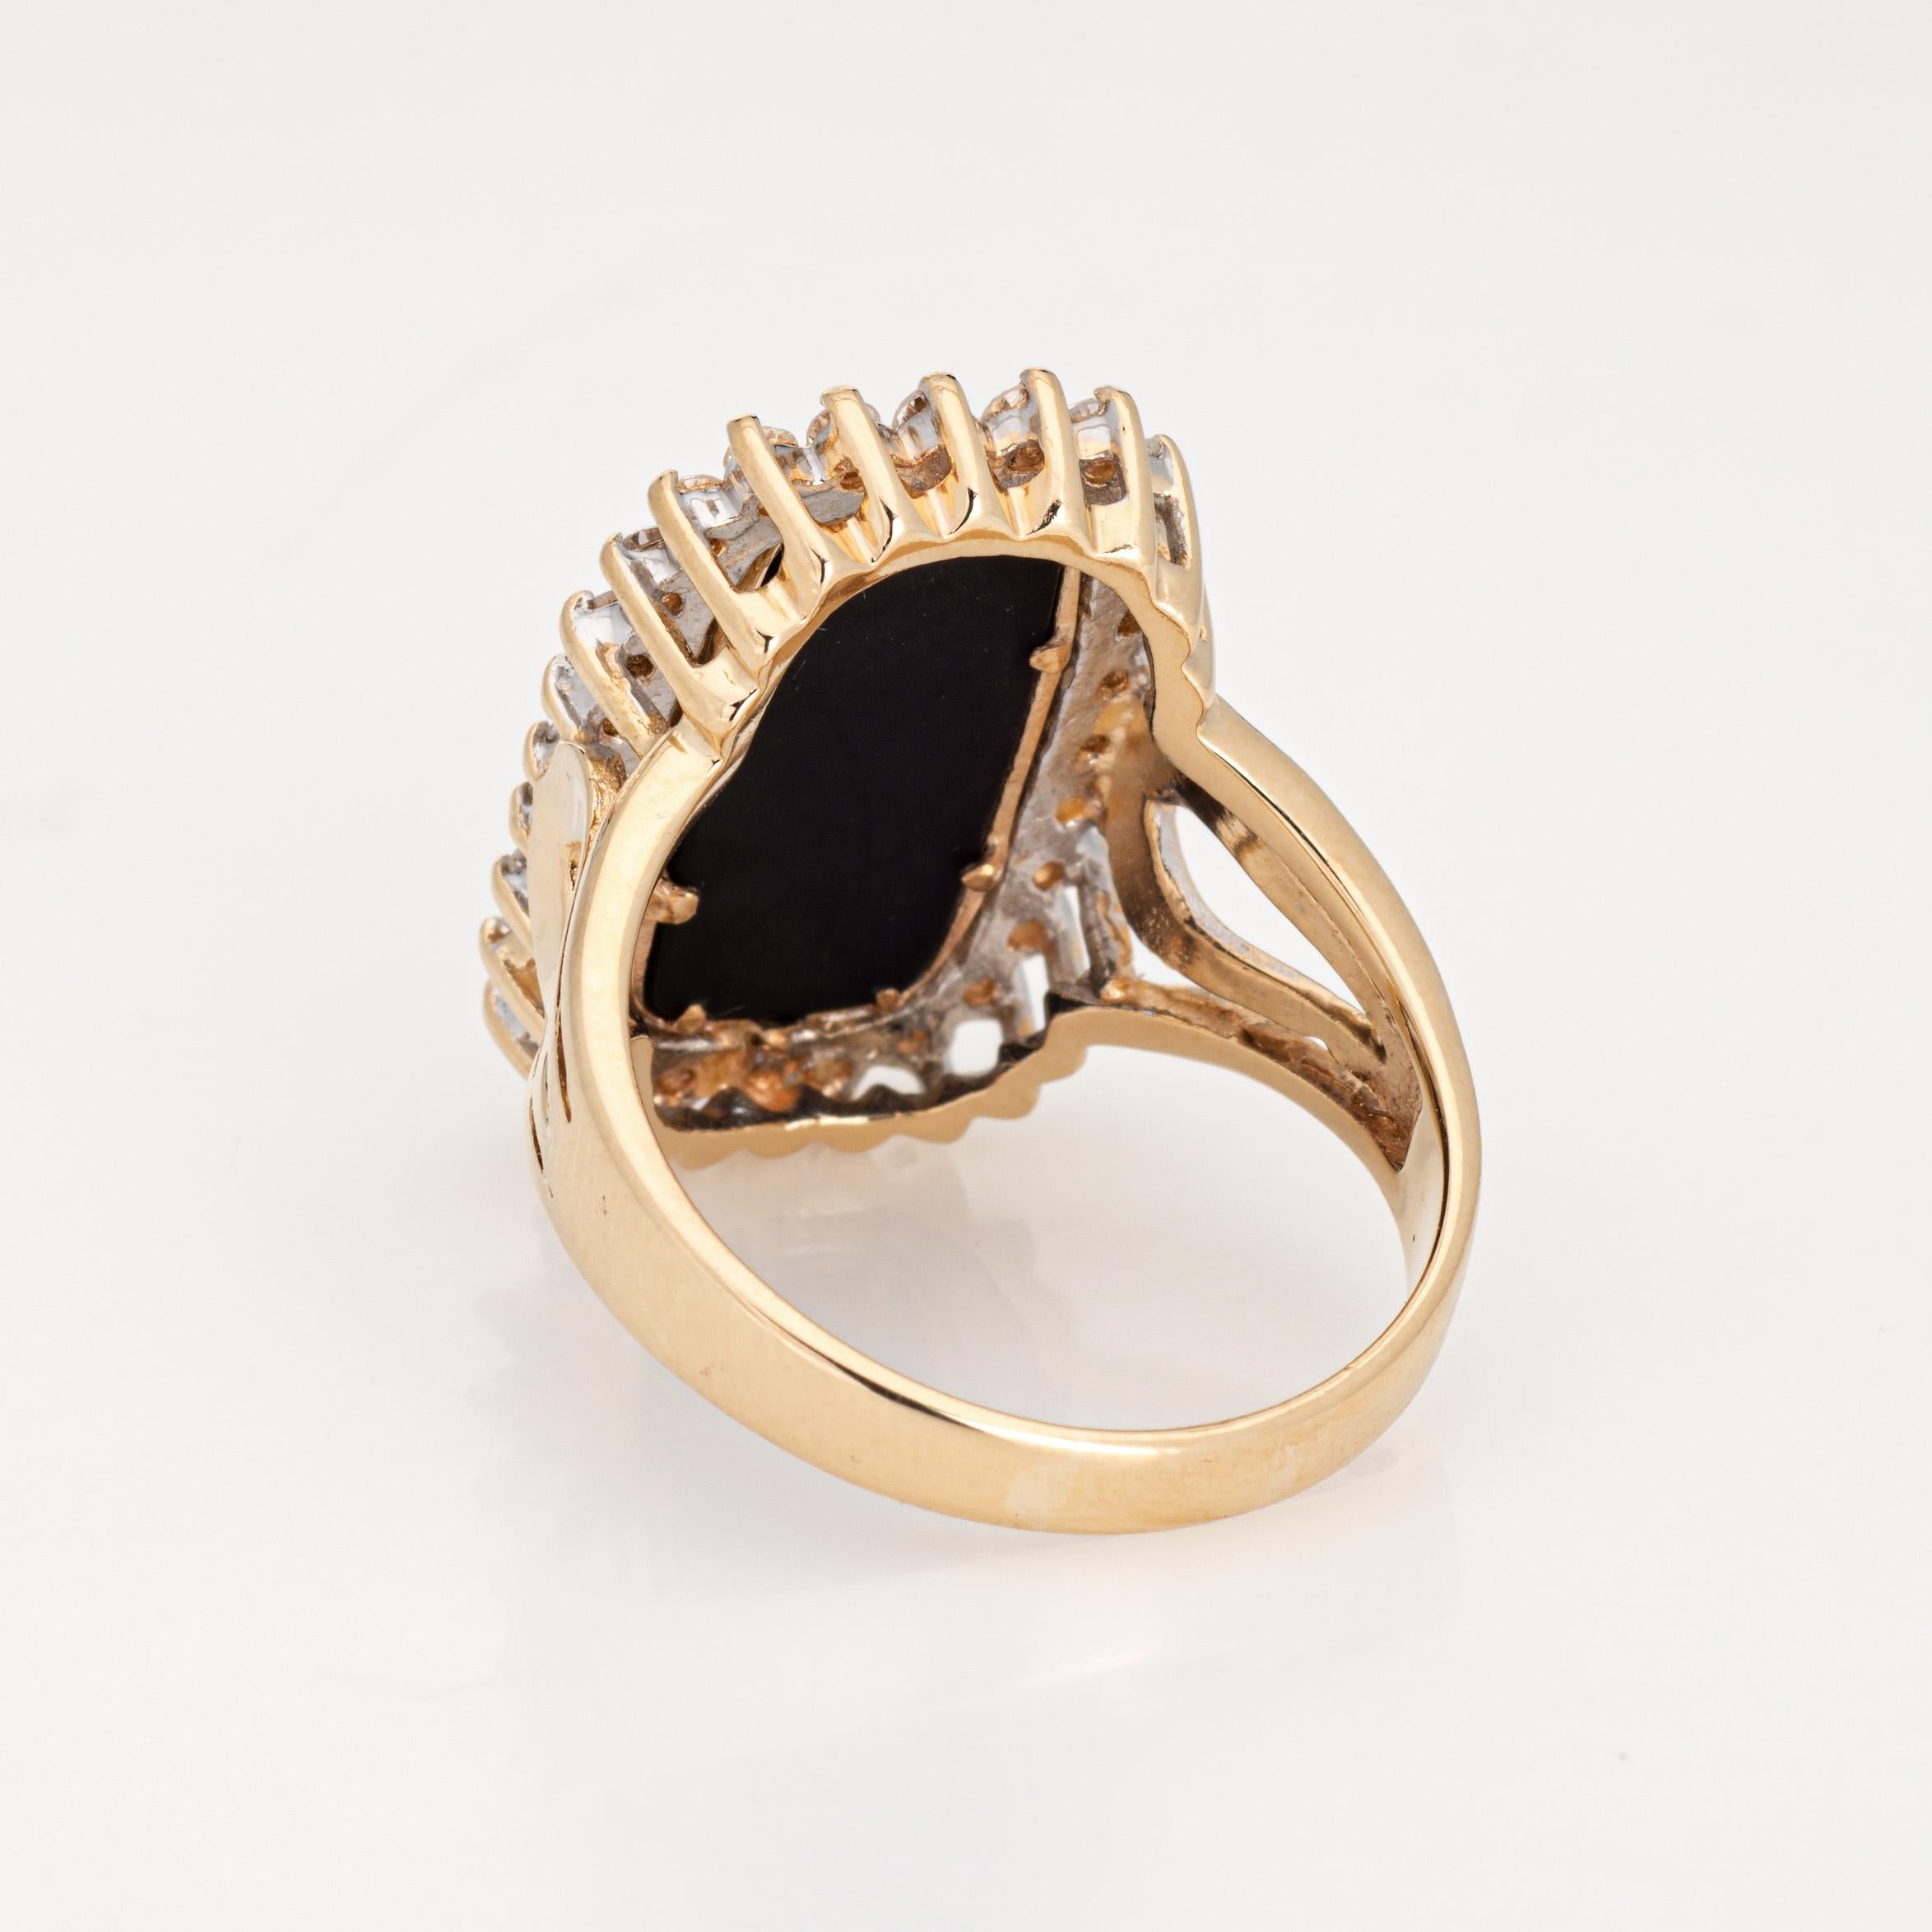 Onyx Diamond Ring Vintage 14k Yellow Gold Sz 7.75 Elonged Square Cocktail  In Good Condition For Sale In Torrance, CA